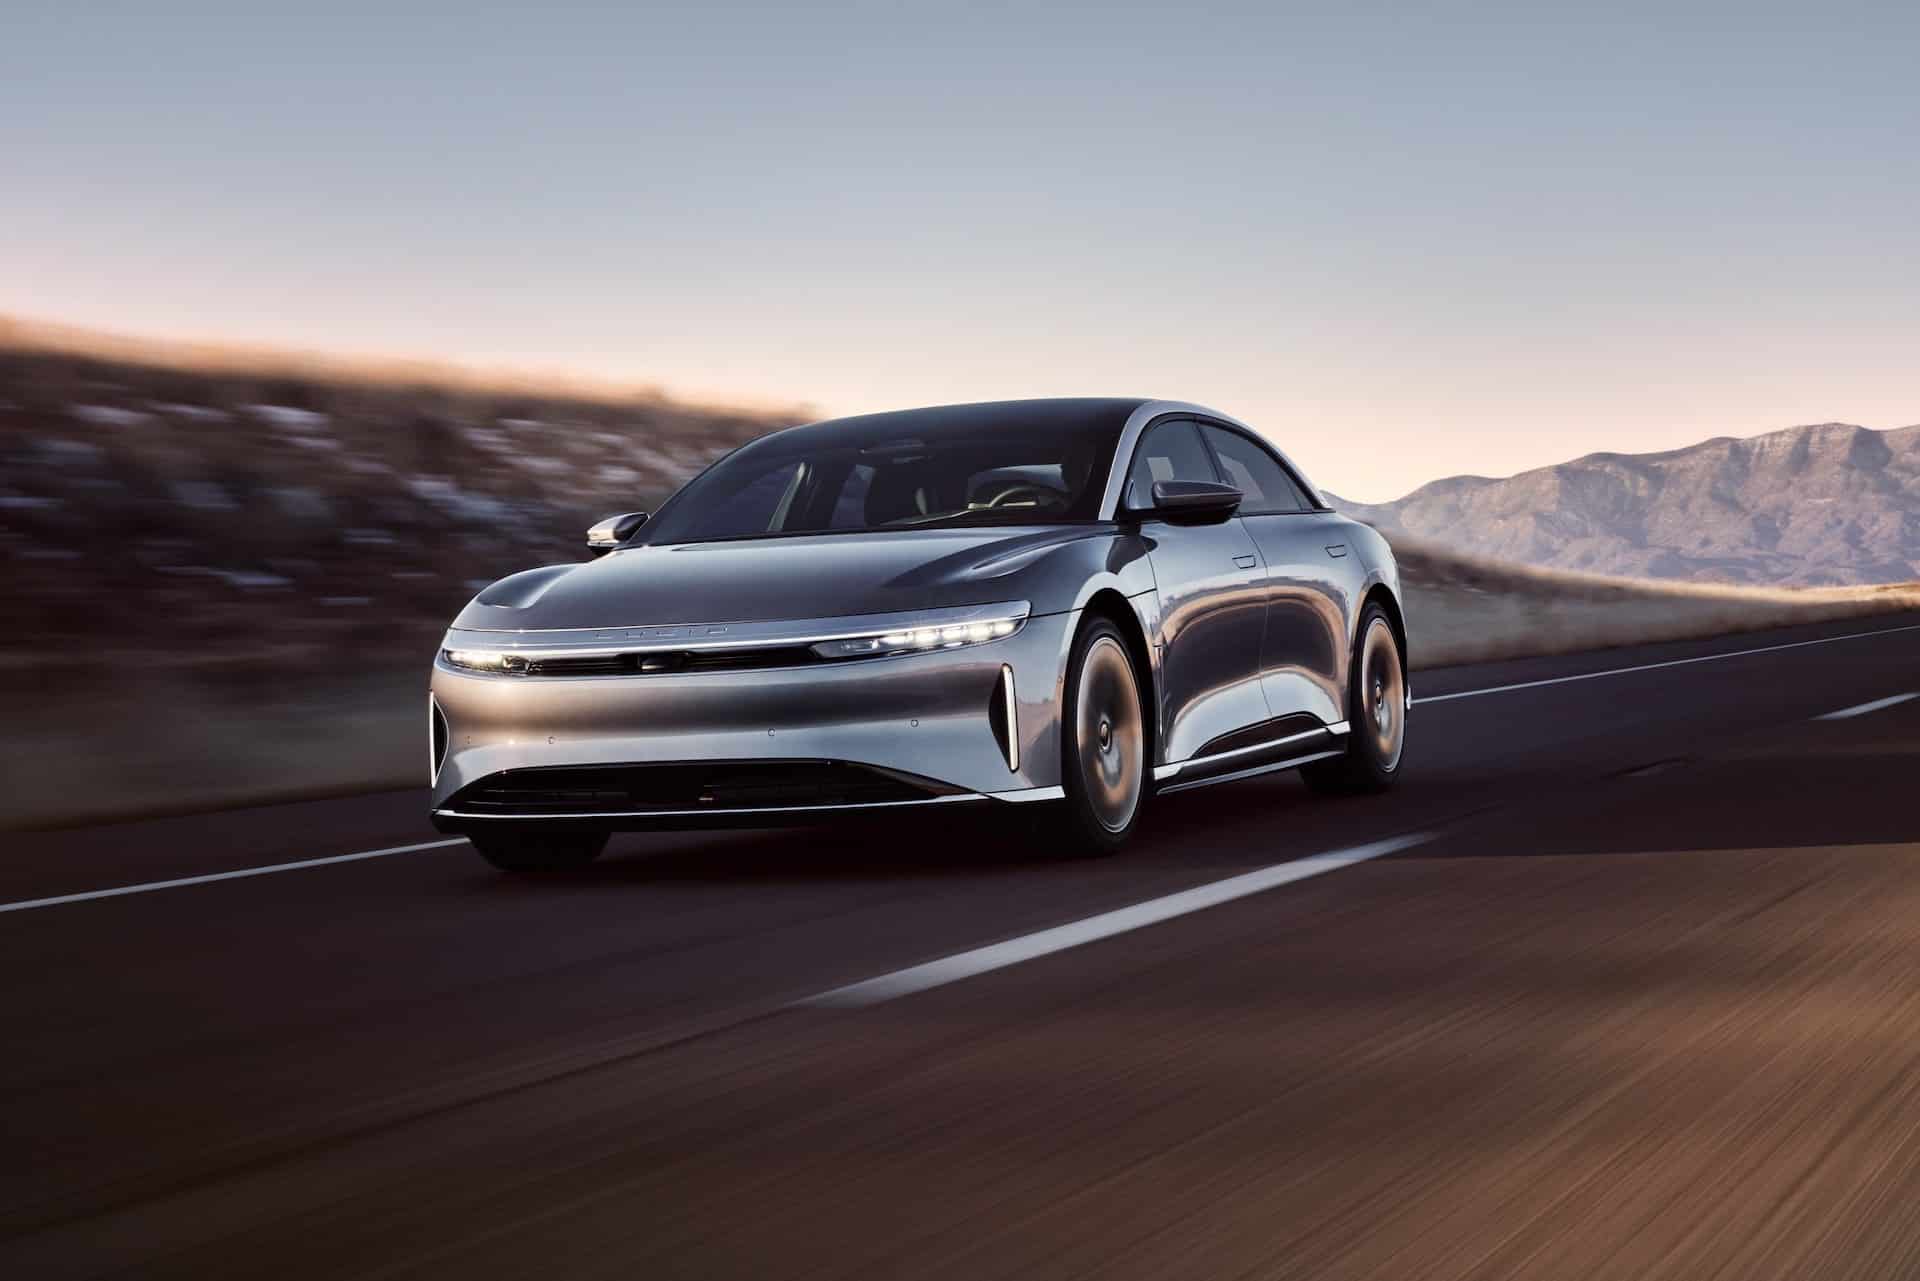 Lucid Group Offers $7,500 EV Credit for Award-Winning Lucid Air Electric Cars